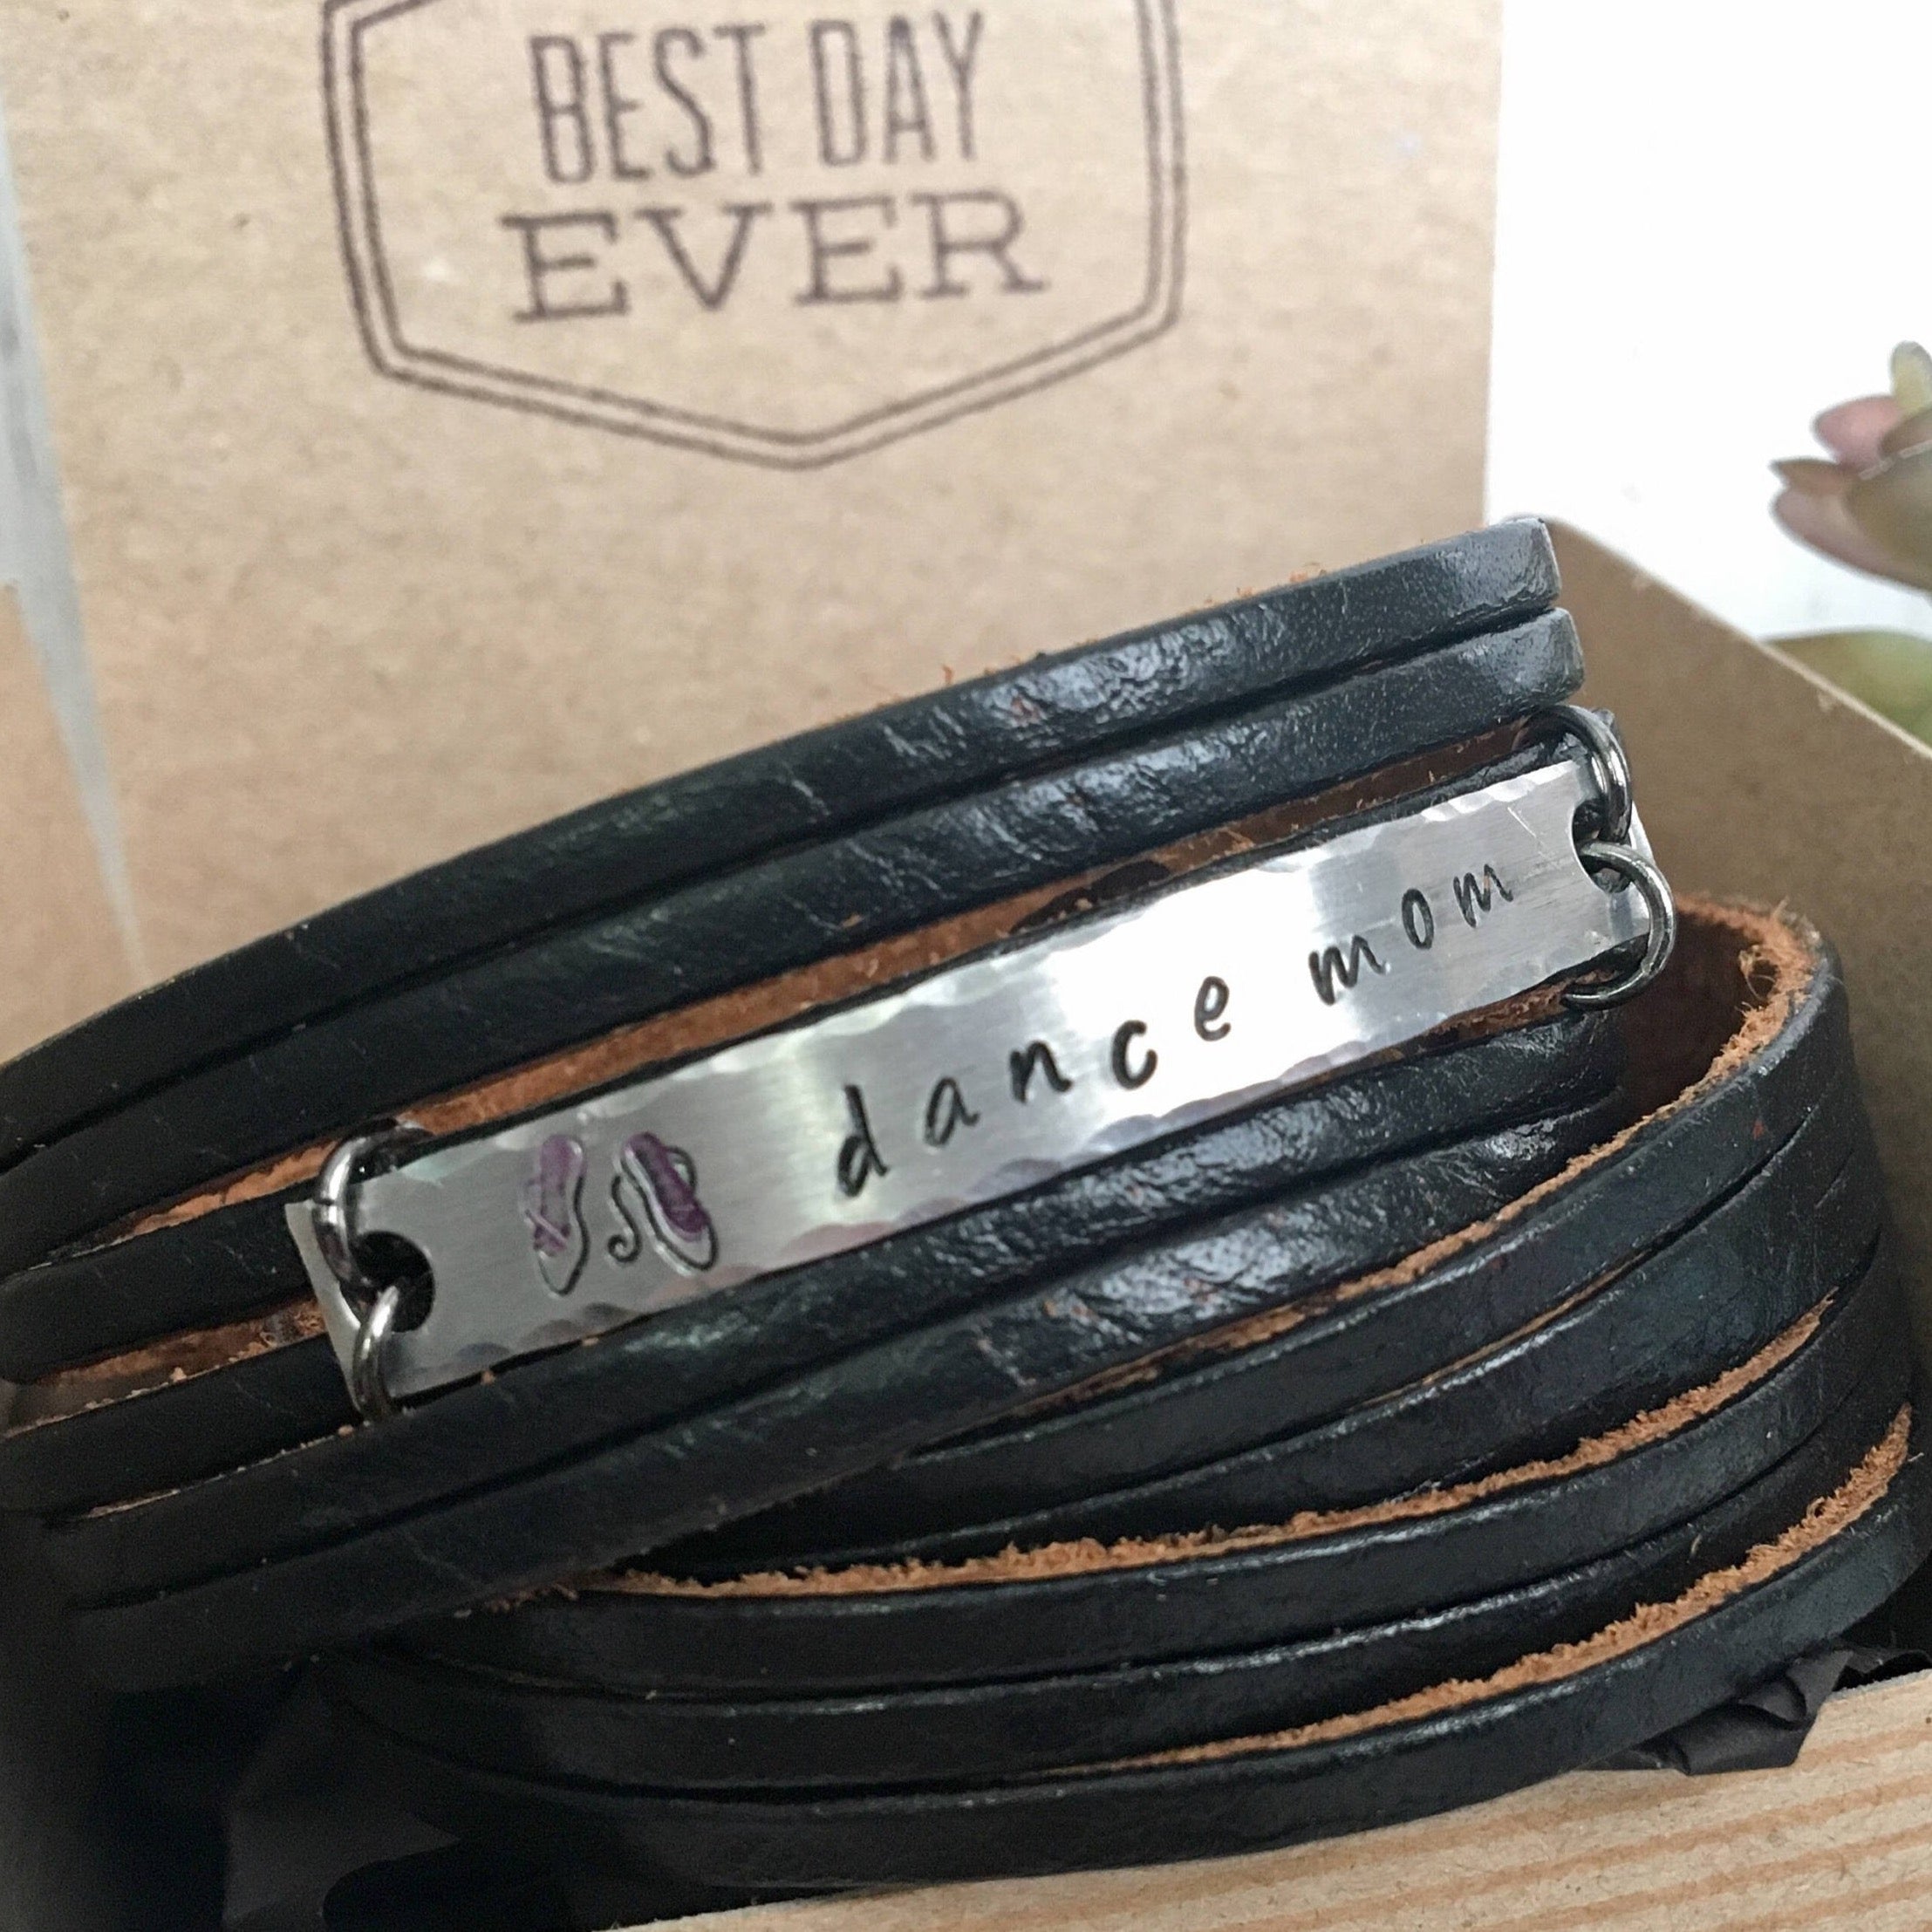 Benito - Personalized Chocolate Brown Genuine Leather Double Wrap Bracelet with Grey Snap Fastener